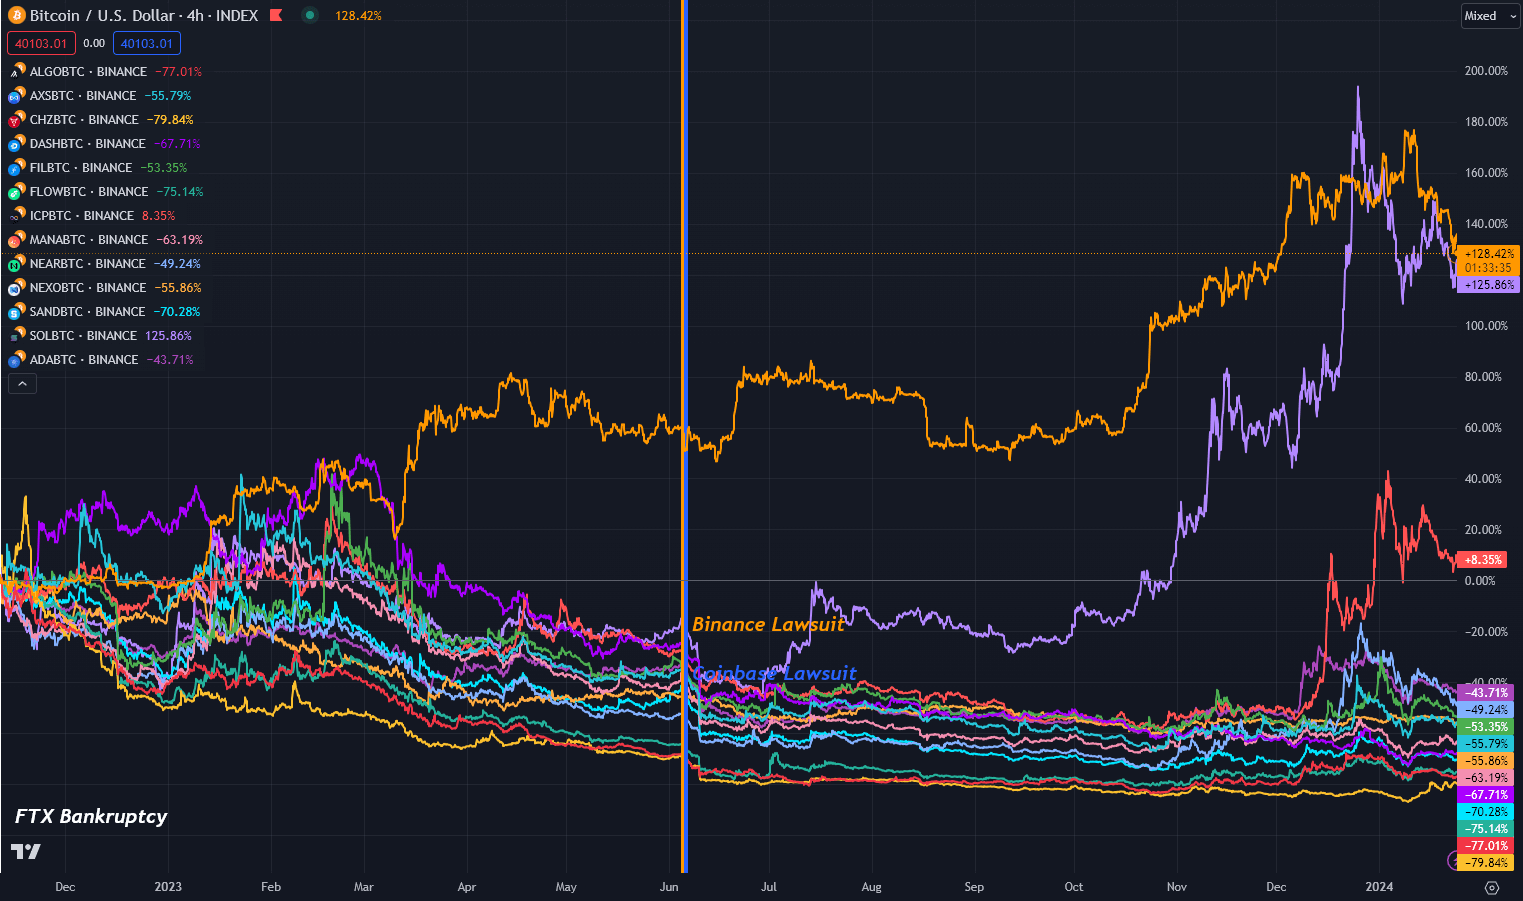 Token performance since FTX collapse